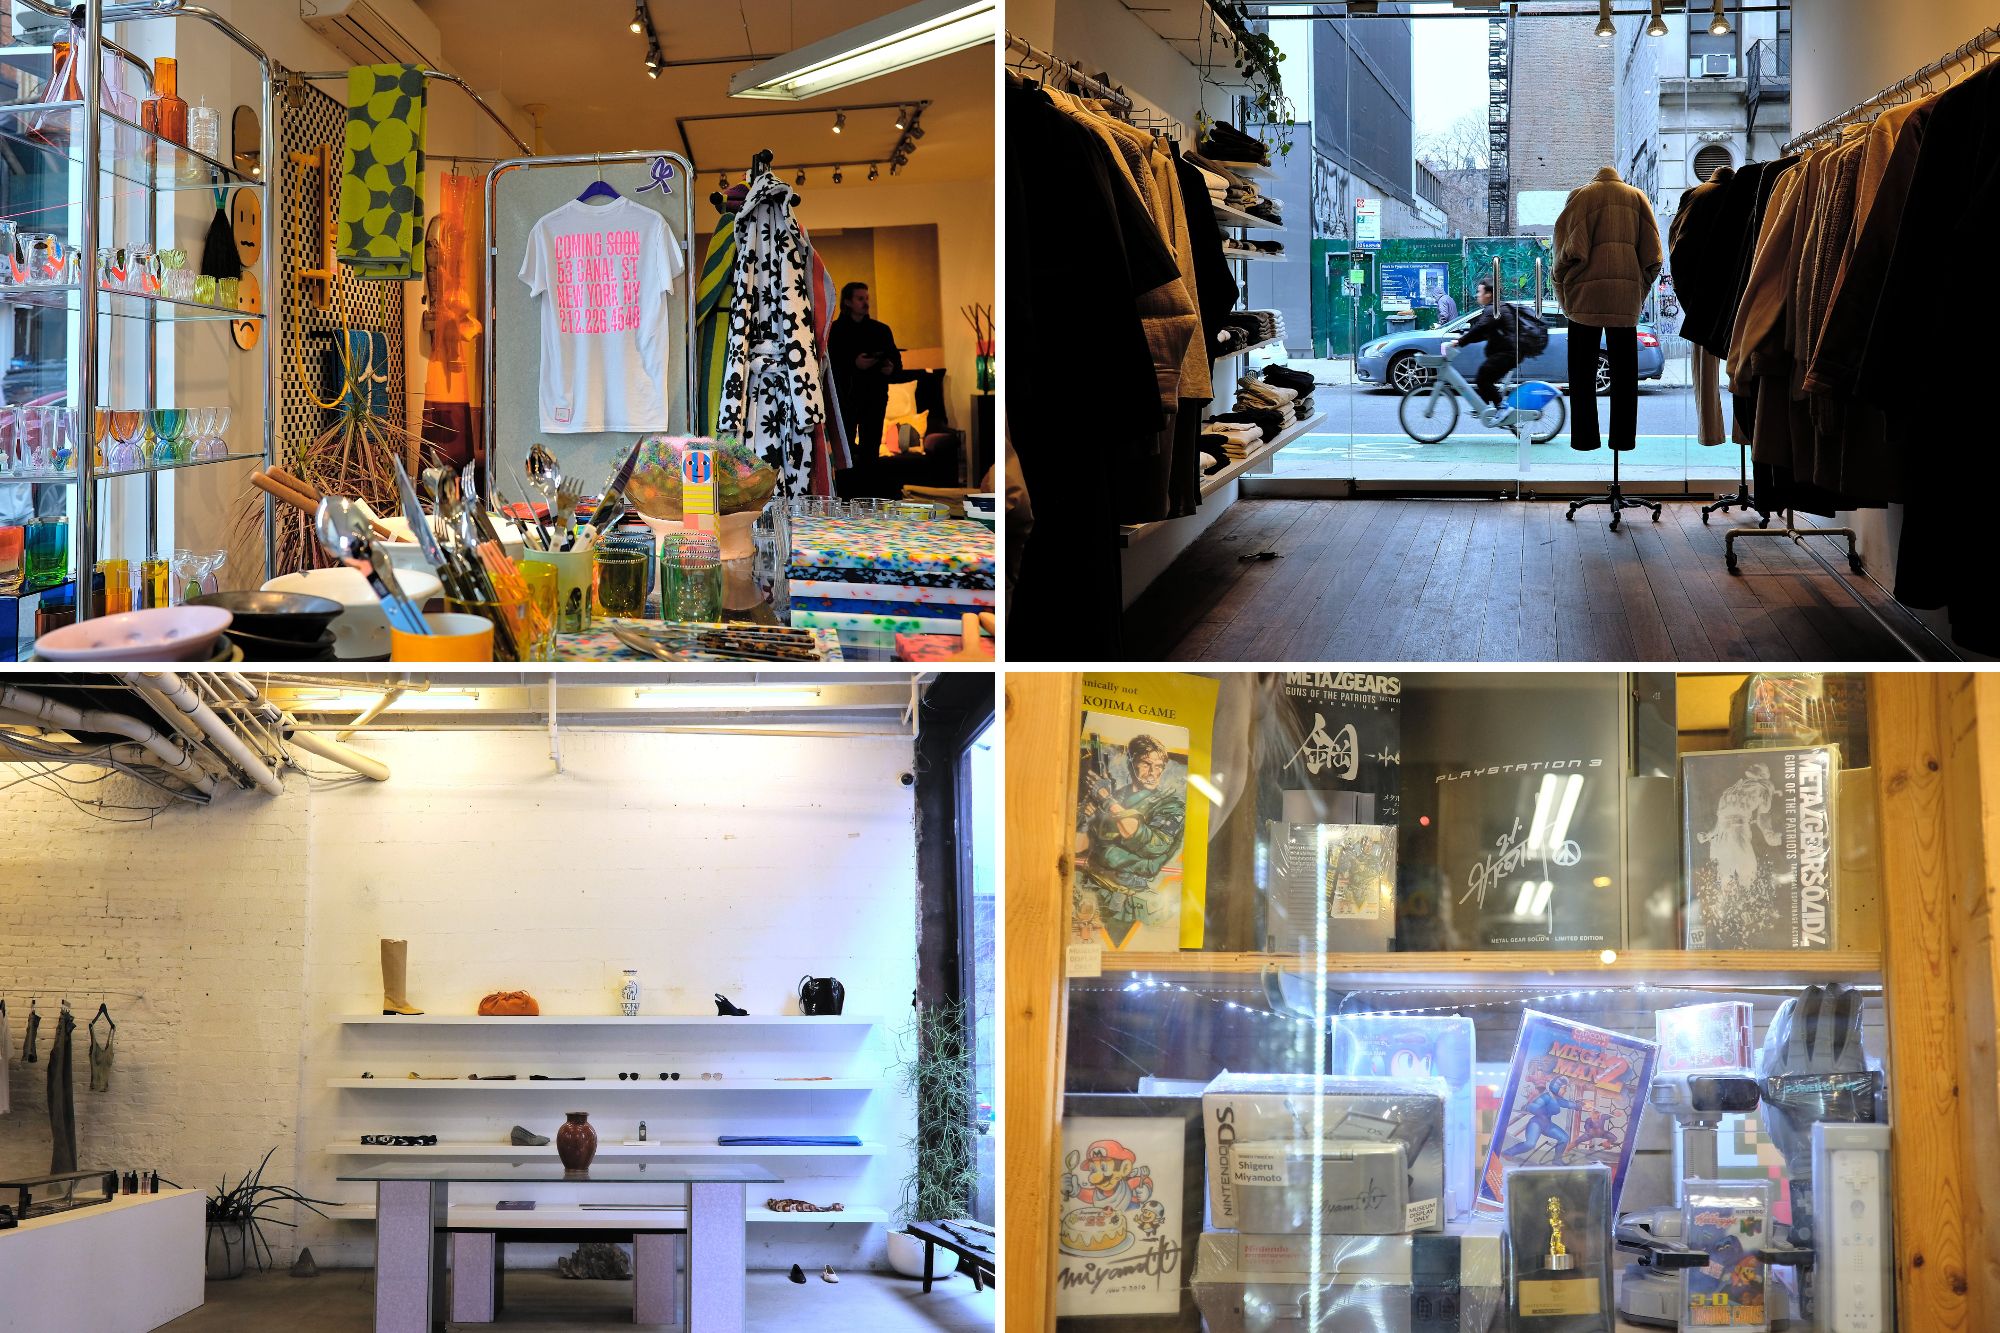 Collage of shops located in the East Village and Lower East Side